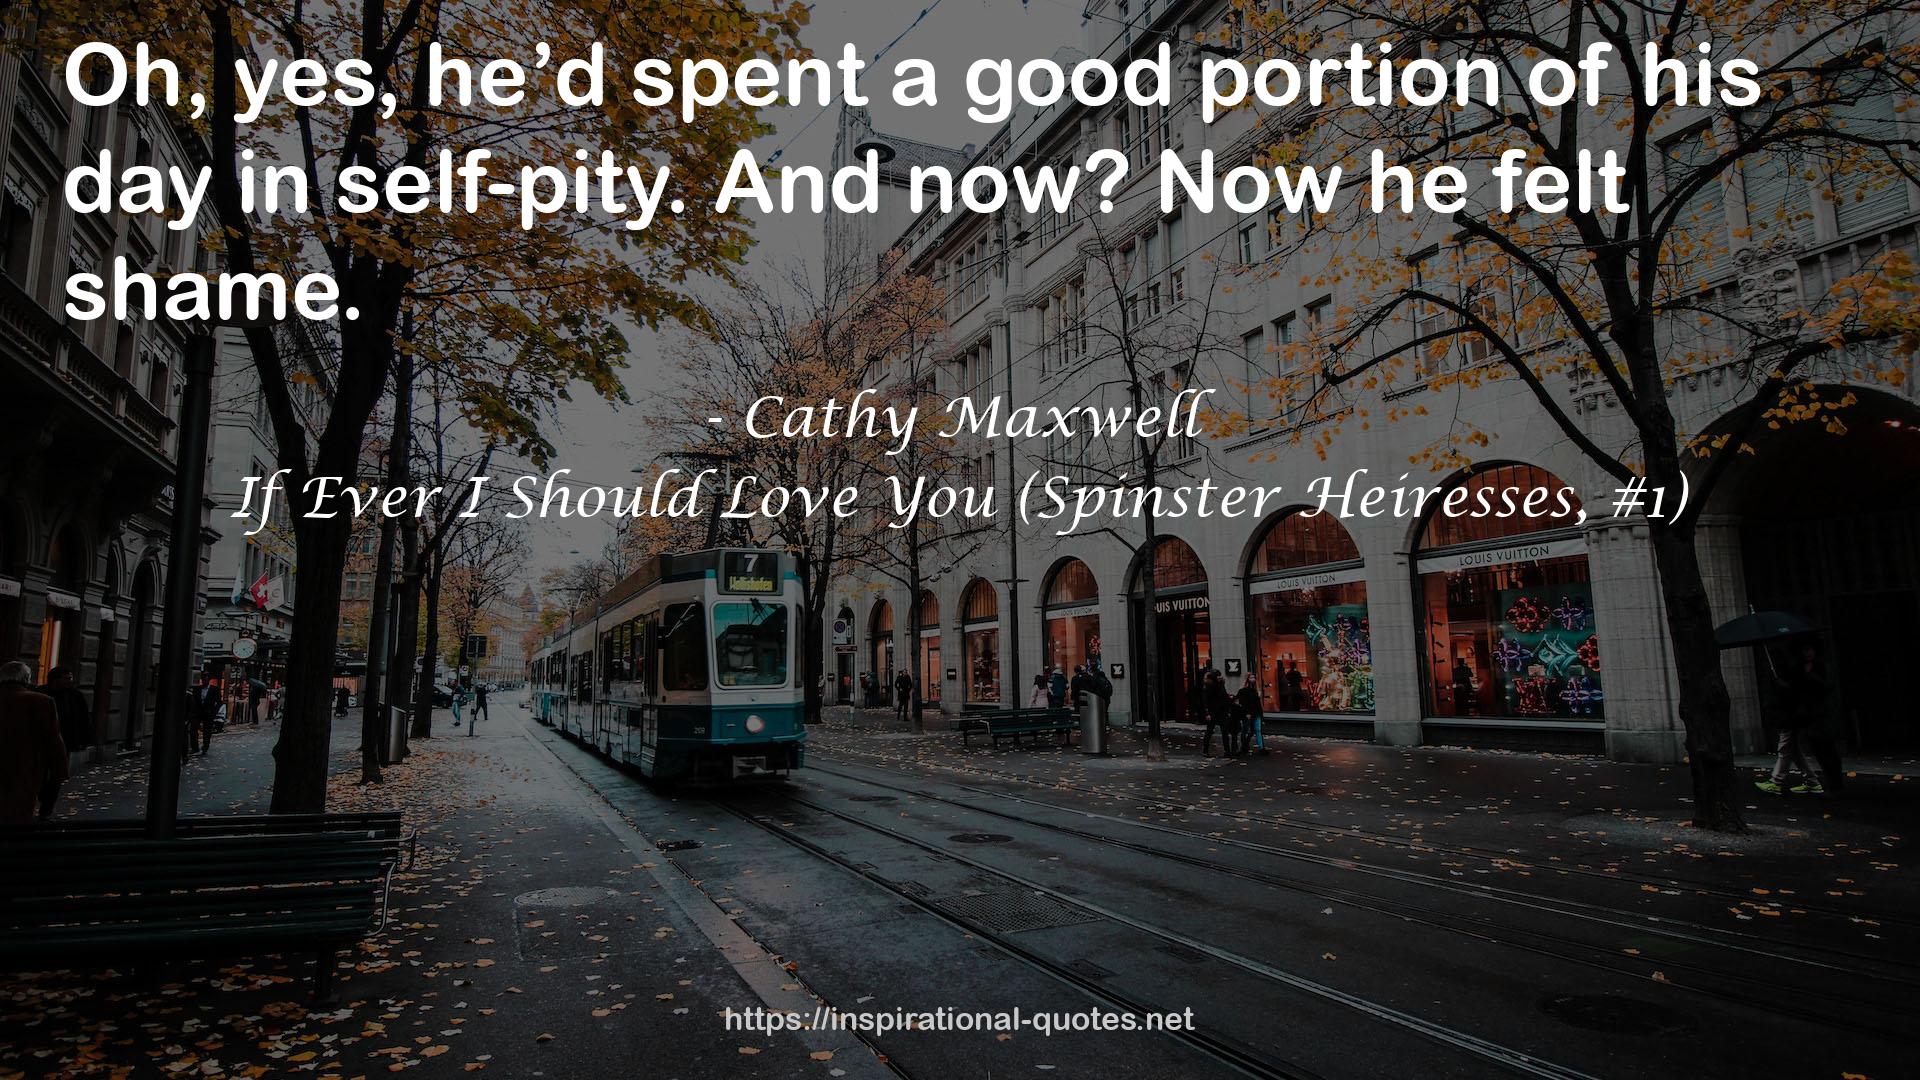 If Ever I Should Love You (Spinster Heiresses, #1) QUOTES